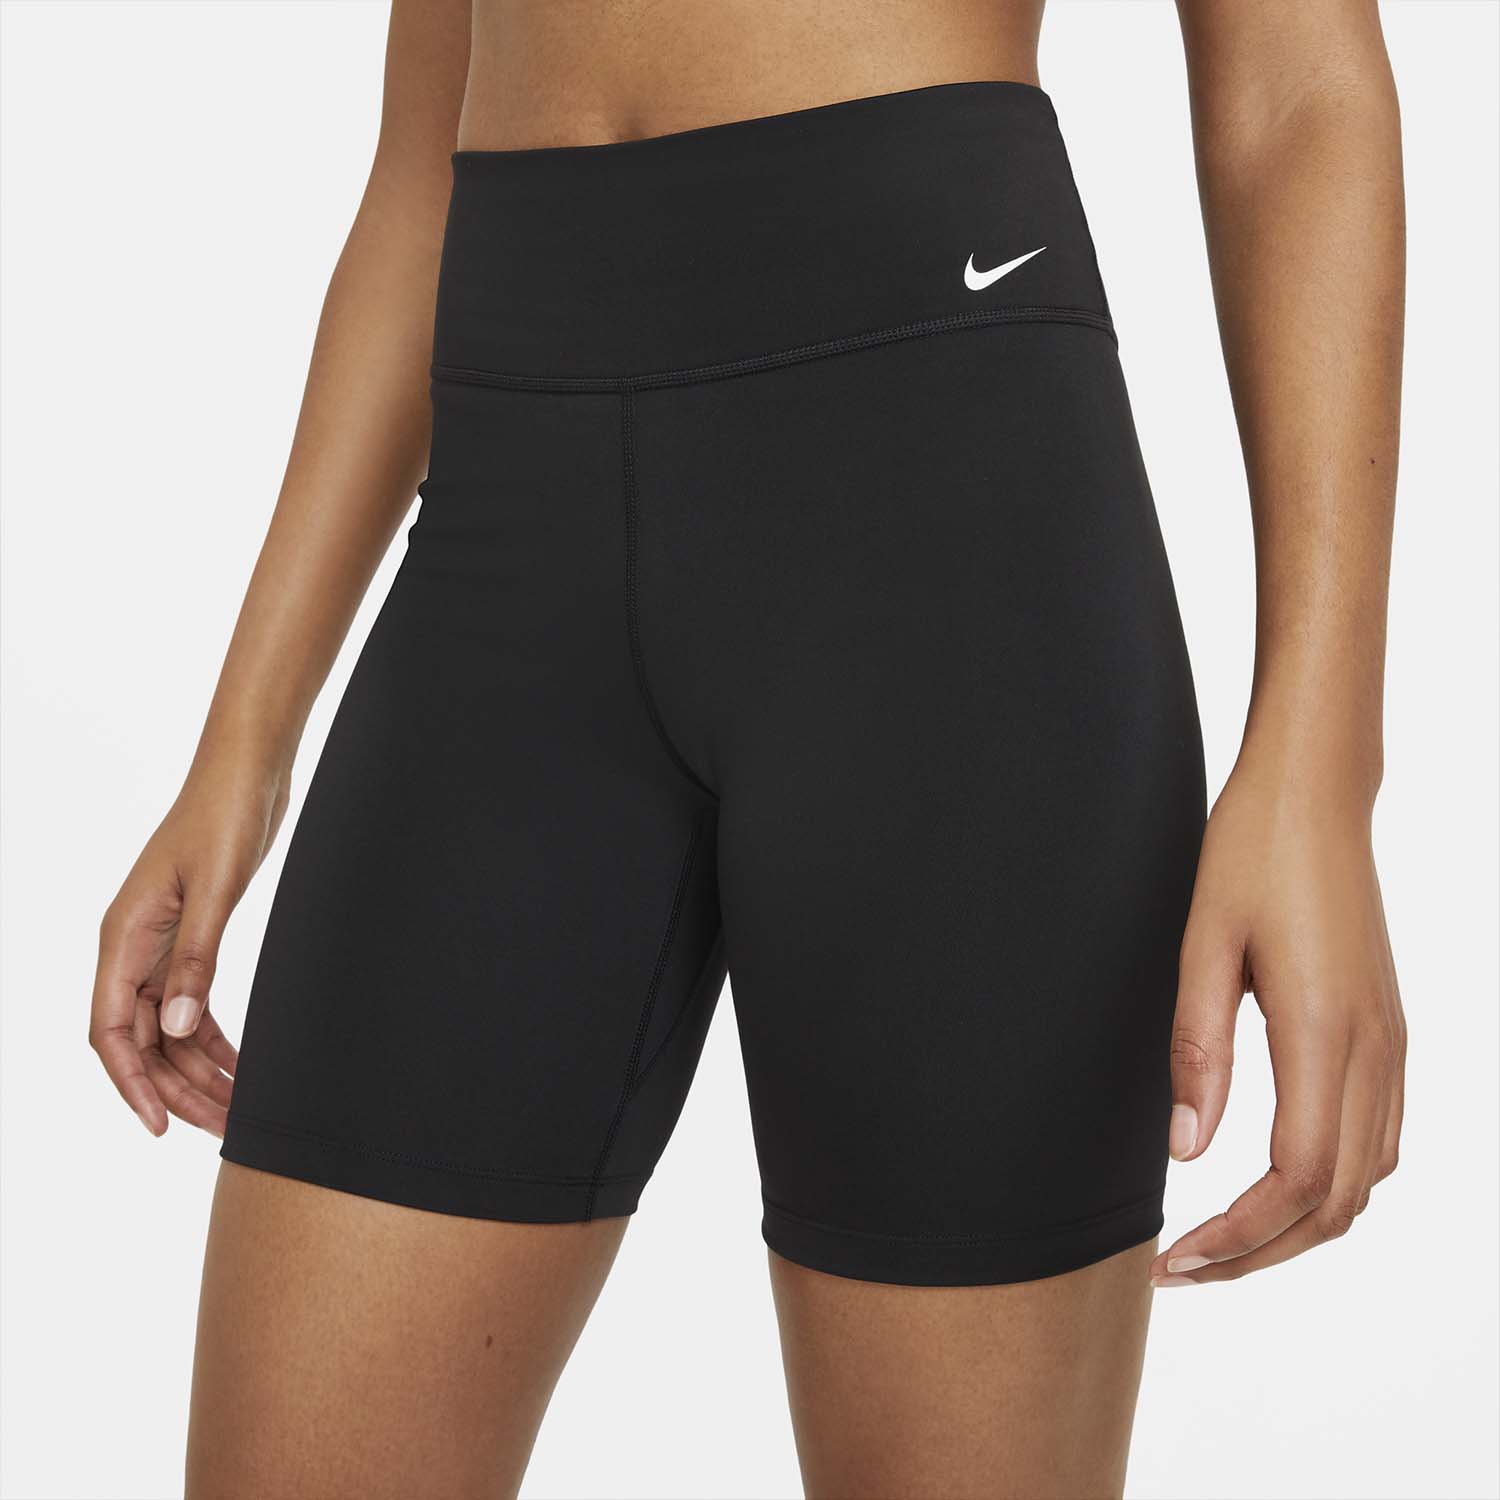 NIKE Bike Shorts for Workouts | Be Ready Summer For